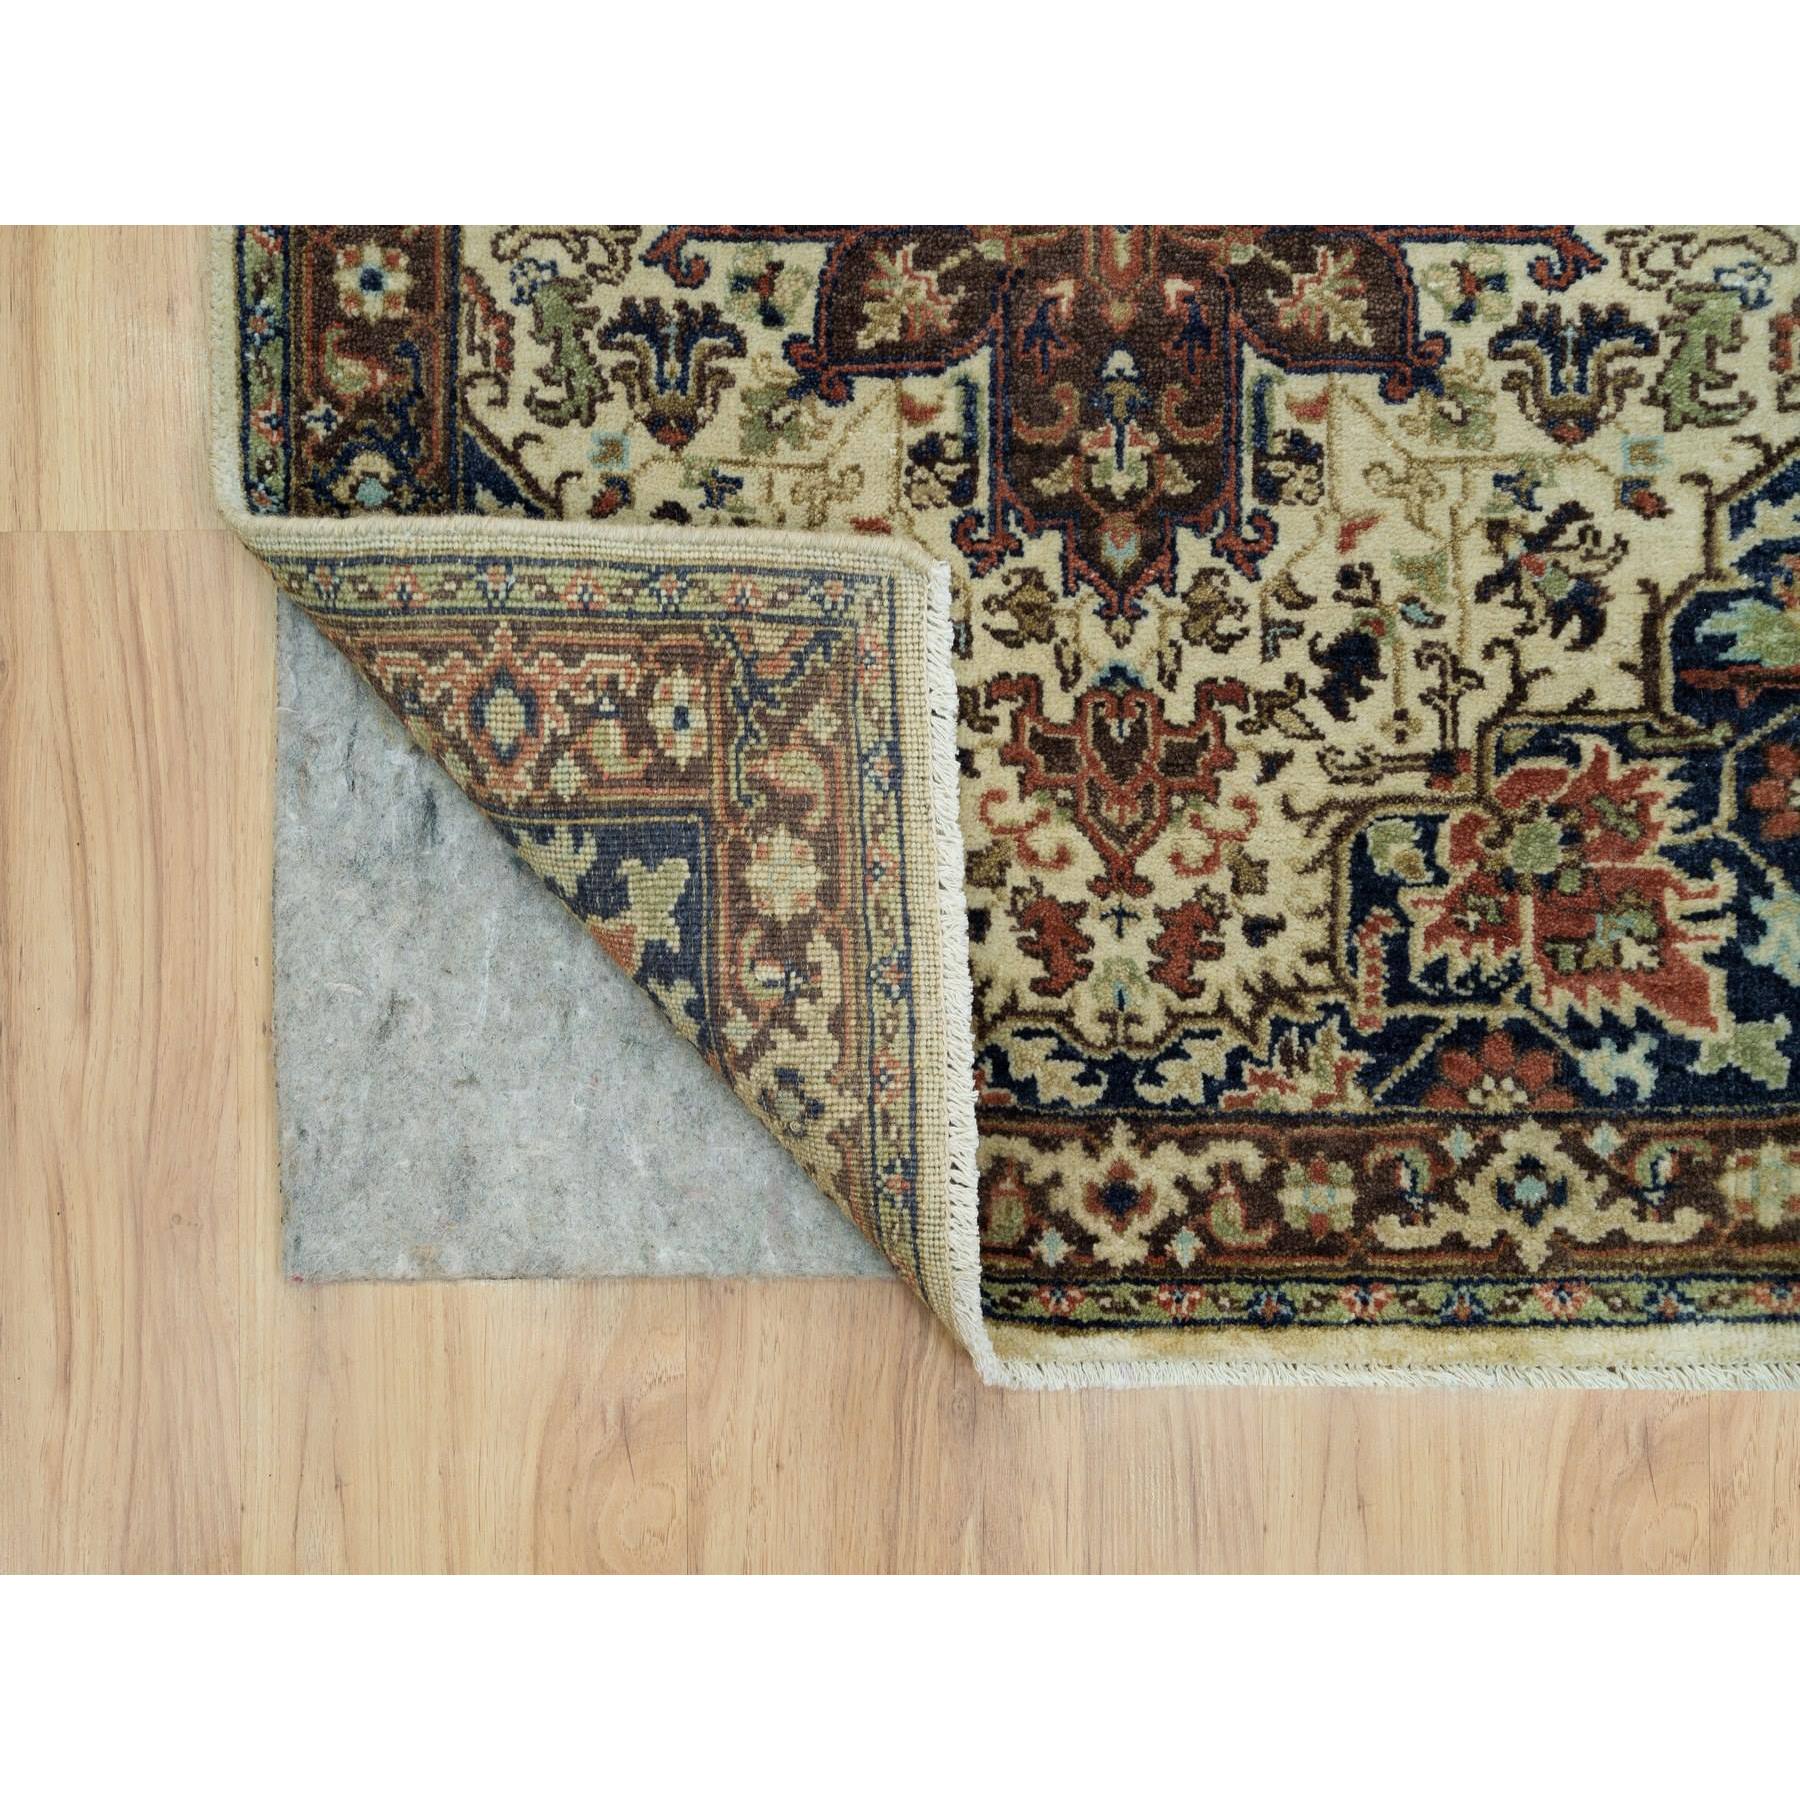 2'8"x12'3" Cosmic Latte Beige, Vegetable Dyes, Antiqued Heriz Re-Creation with Geometric Medallions, Extra Soft Wool, Soft and Lush Pile, Hand Woven, Runner Oriental Rug 